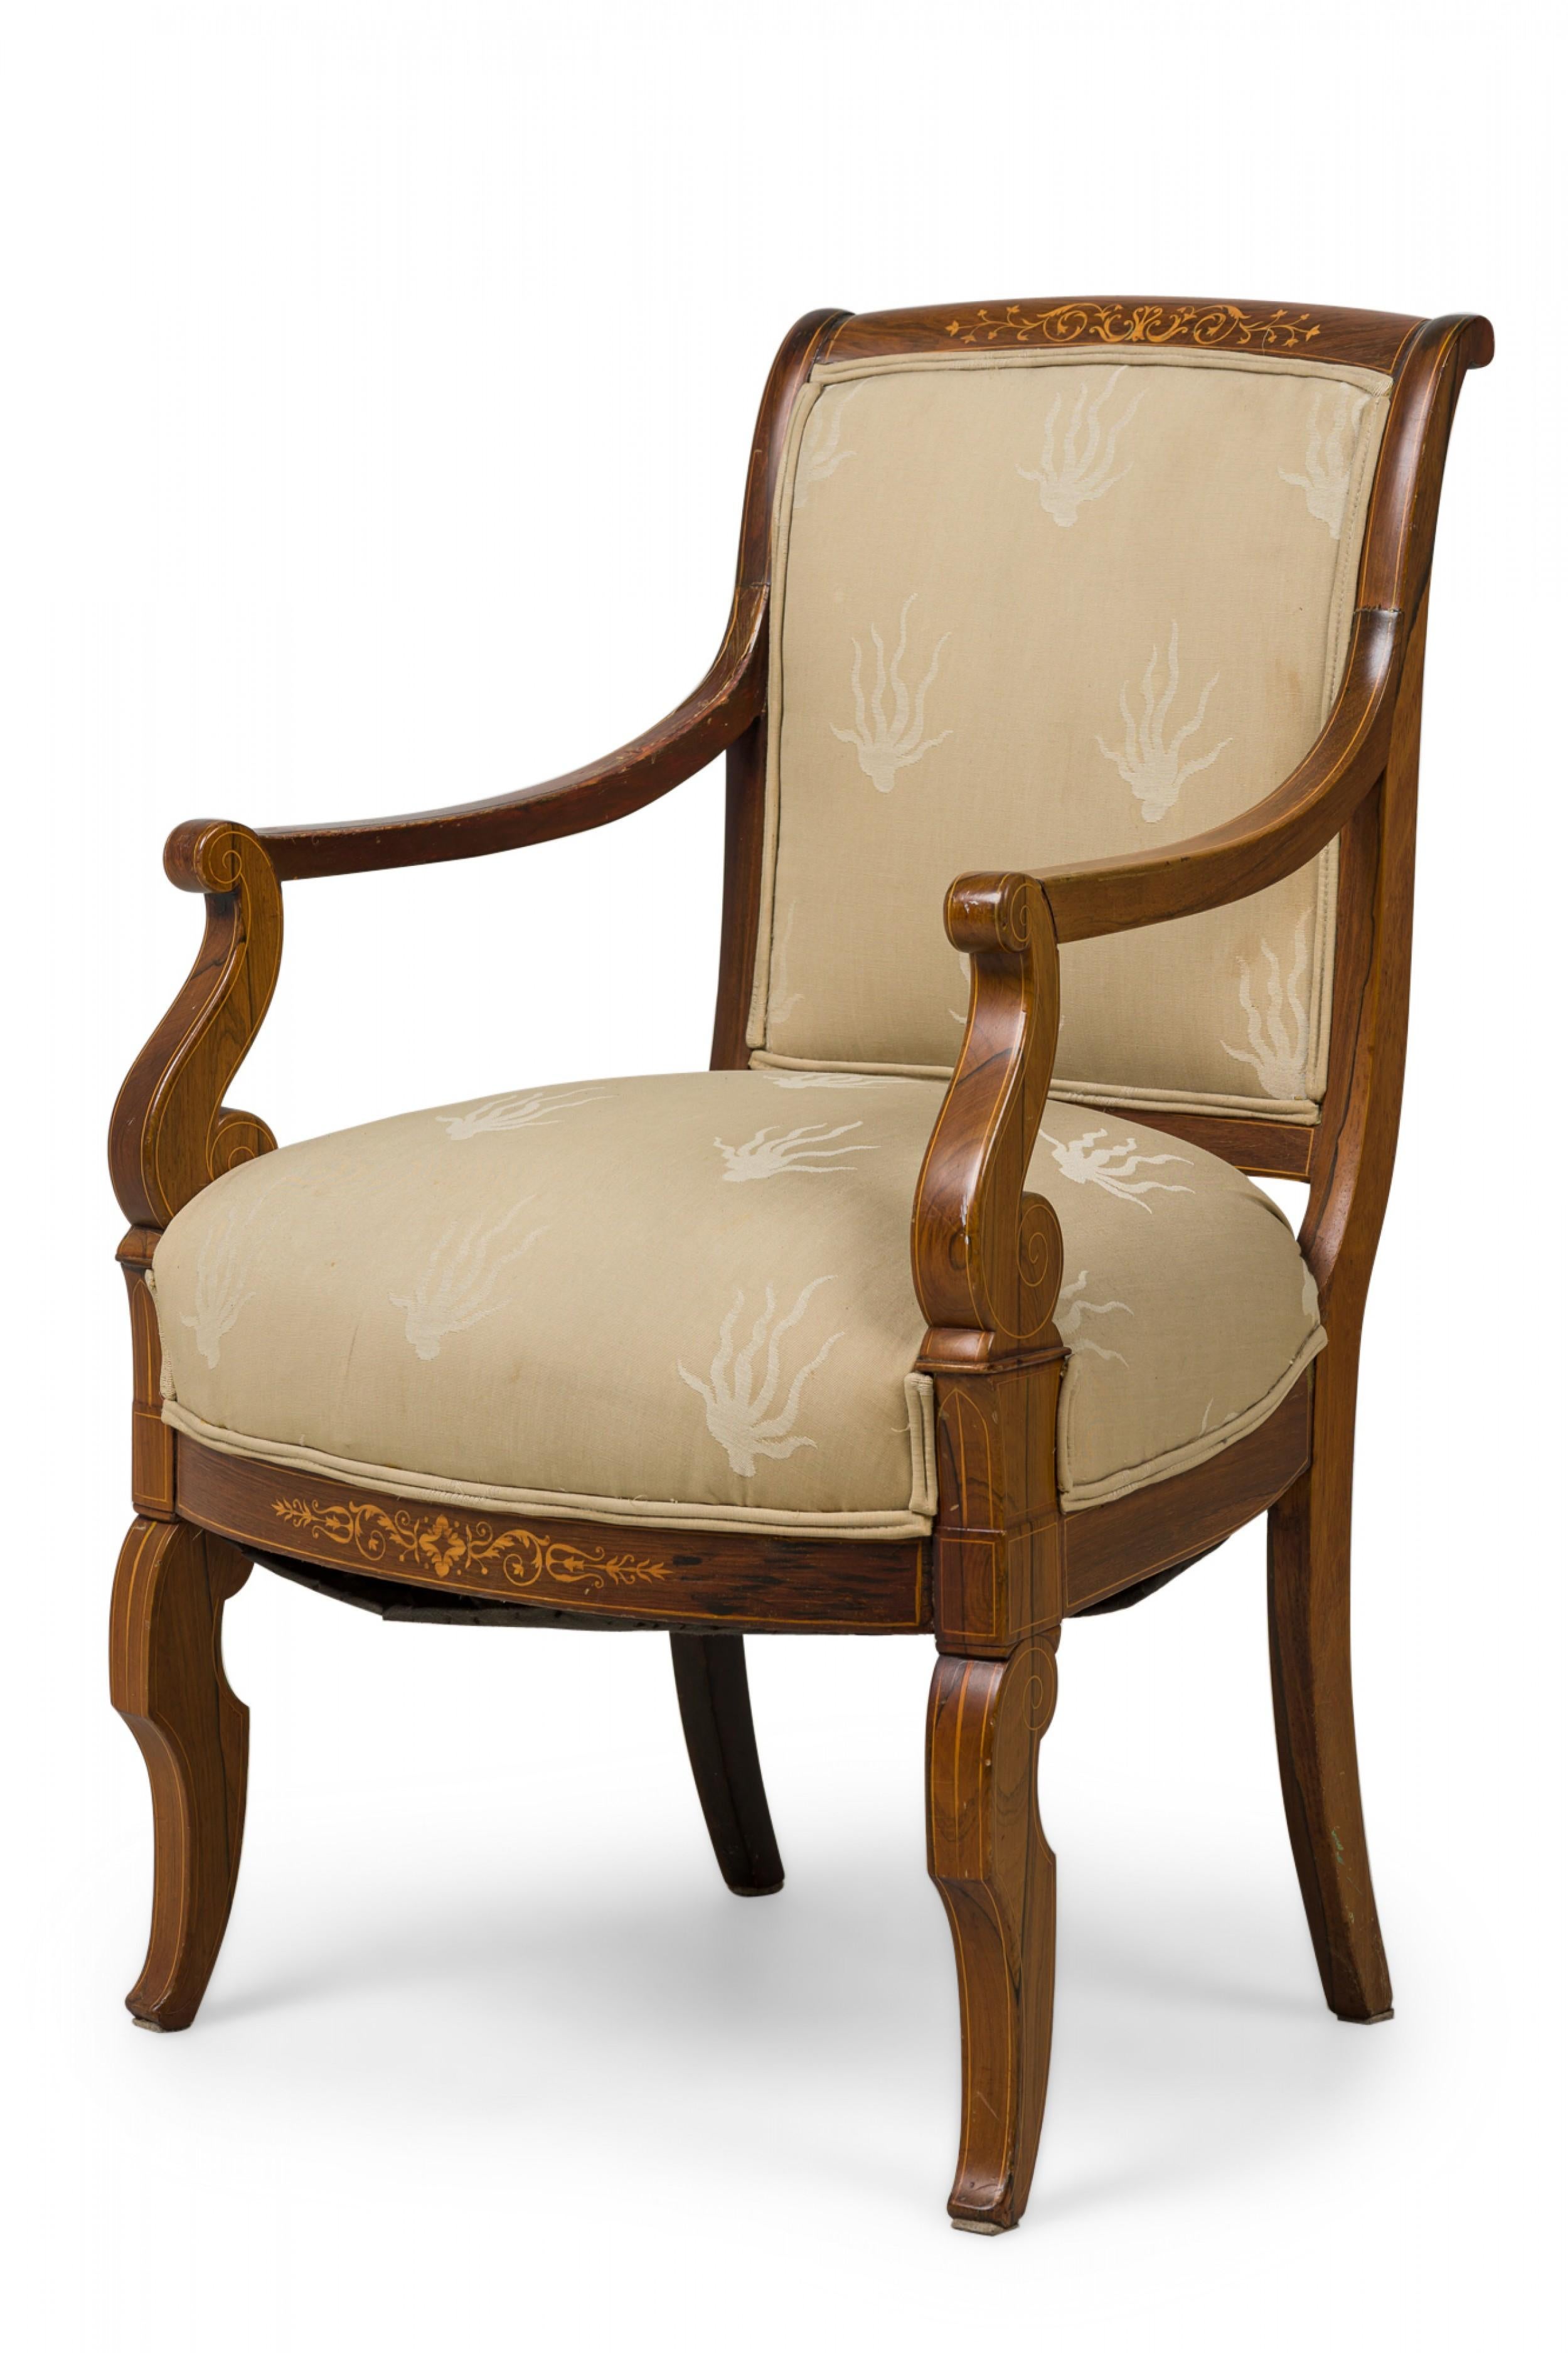 French Charles X (19th Century) open armchair featuring a scroll form mahogany frame with sweeping arms, inlaid walnut parquetry on the backrest and front friezes, upholstered in a two-toned beige patterned fabric with double piping, standing on